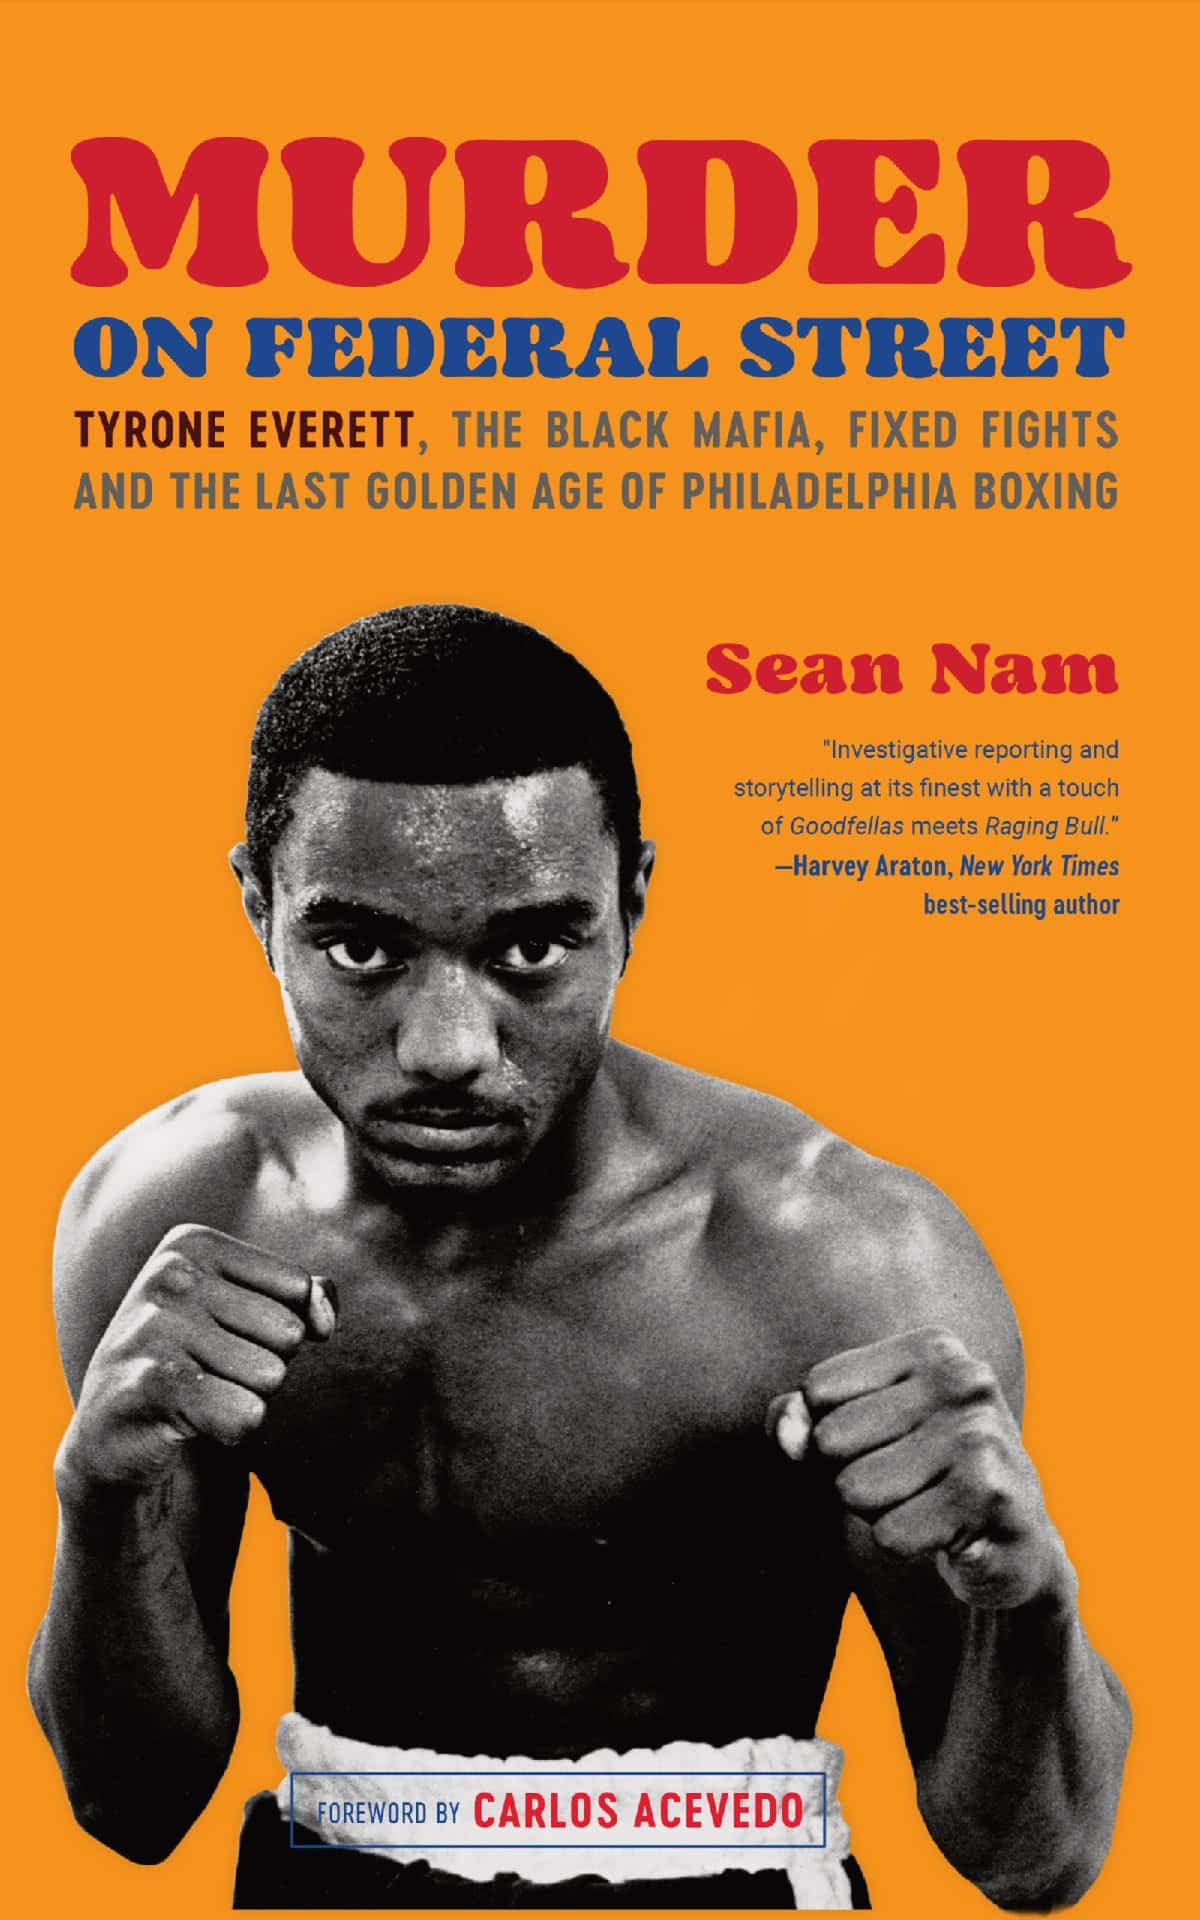 A must read boxing story for all boxing fans! - Boxing Image